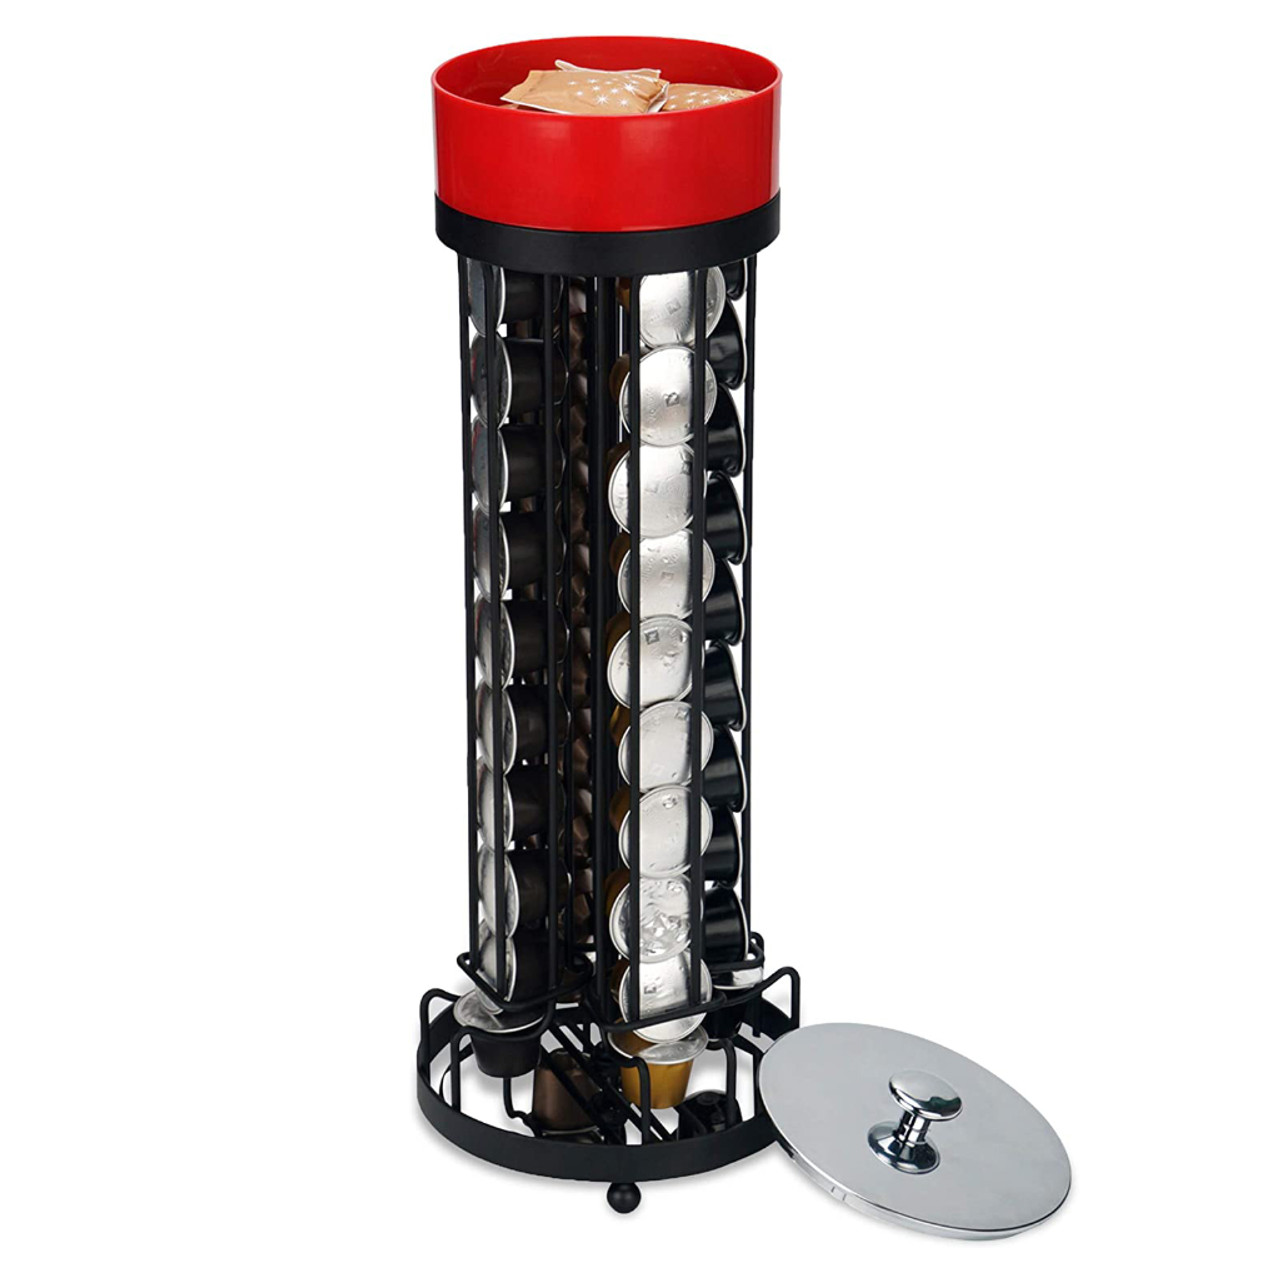 Nespresso Pod Carousel Holder Rack with Sugar Compartment product image